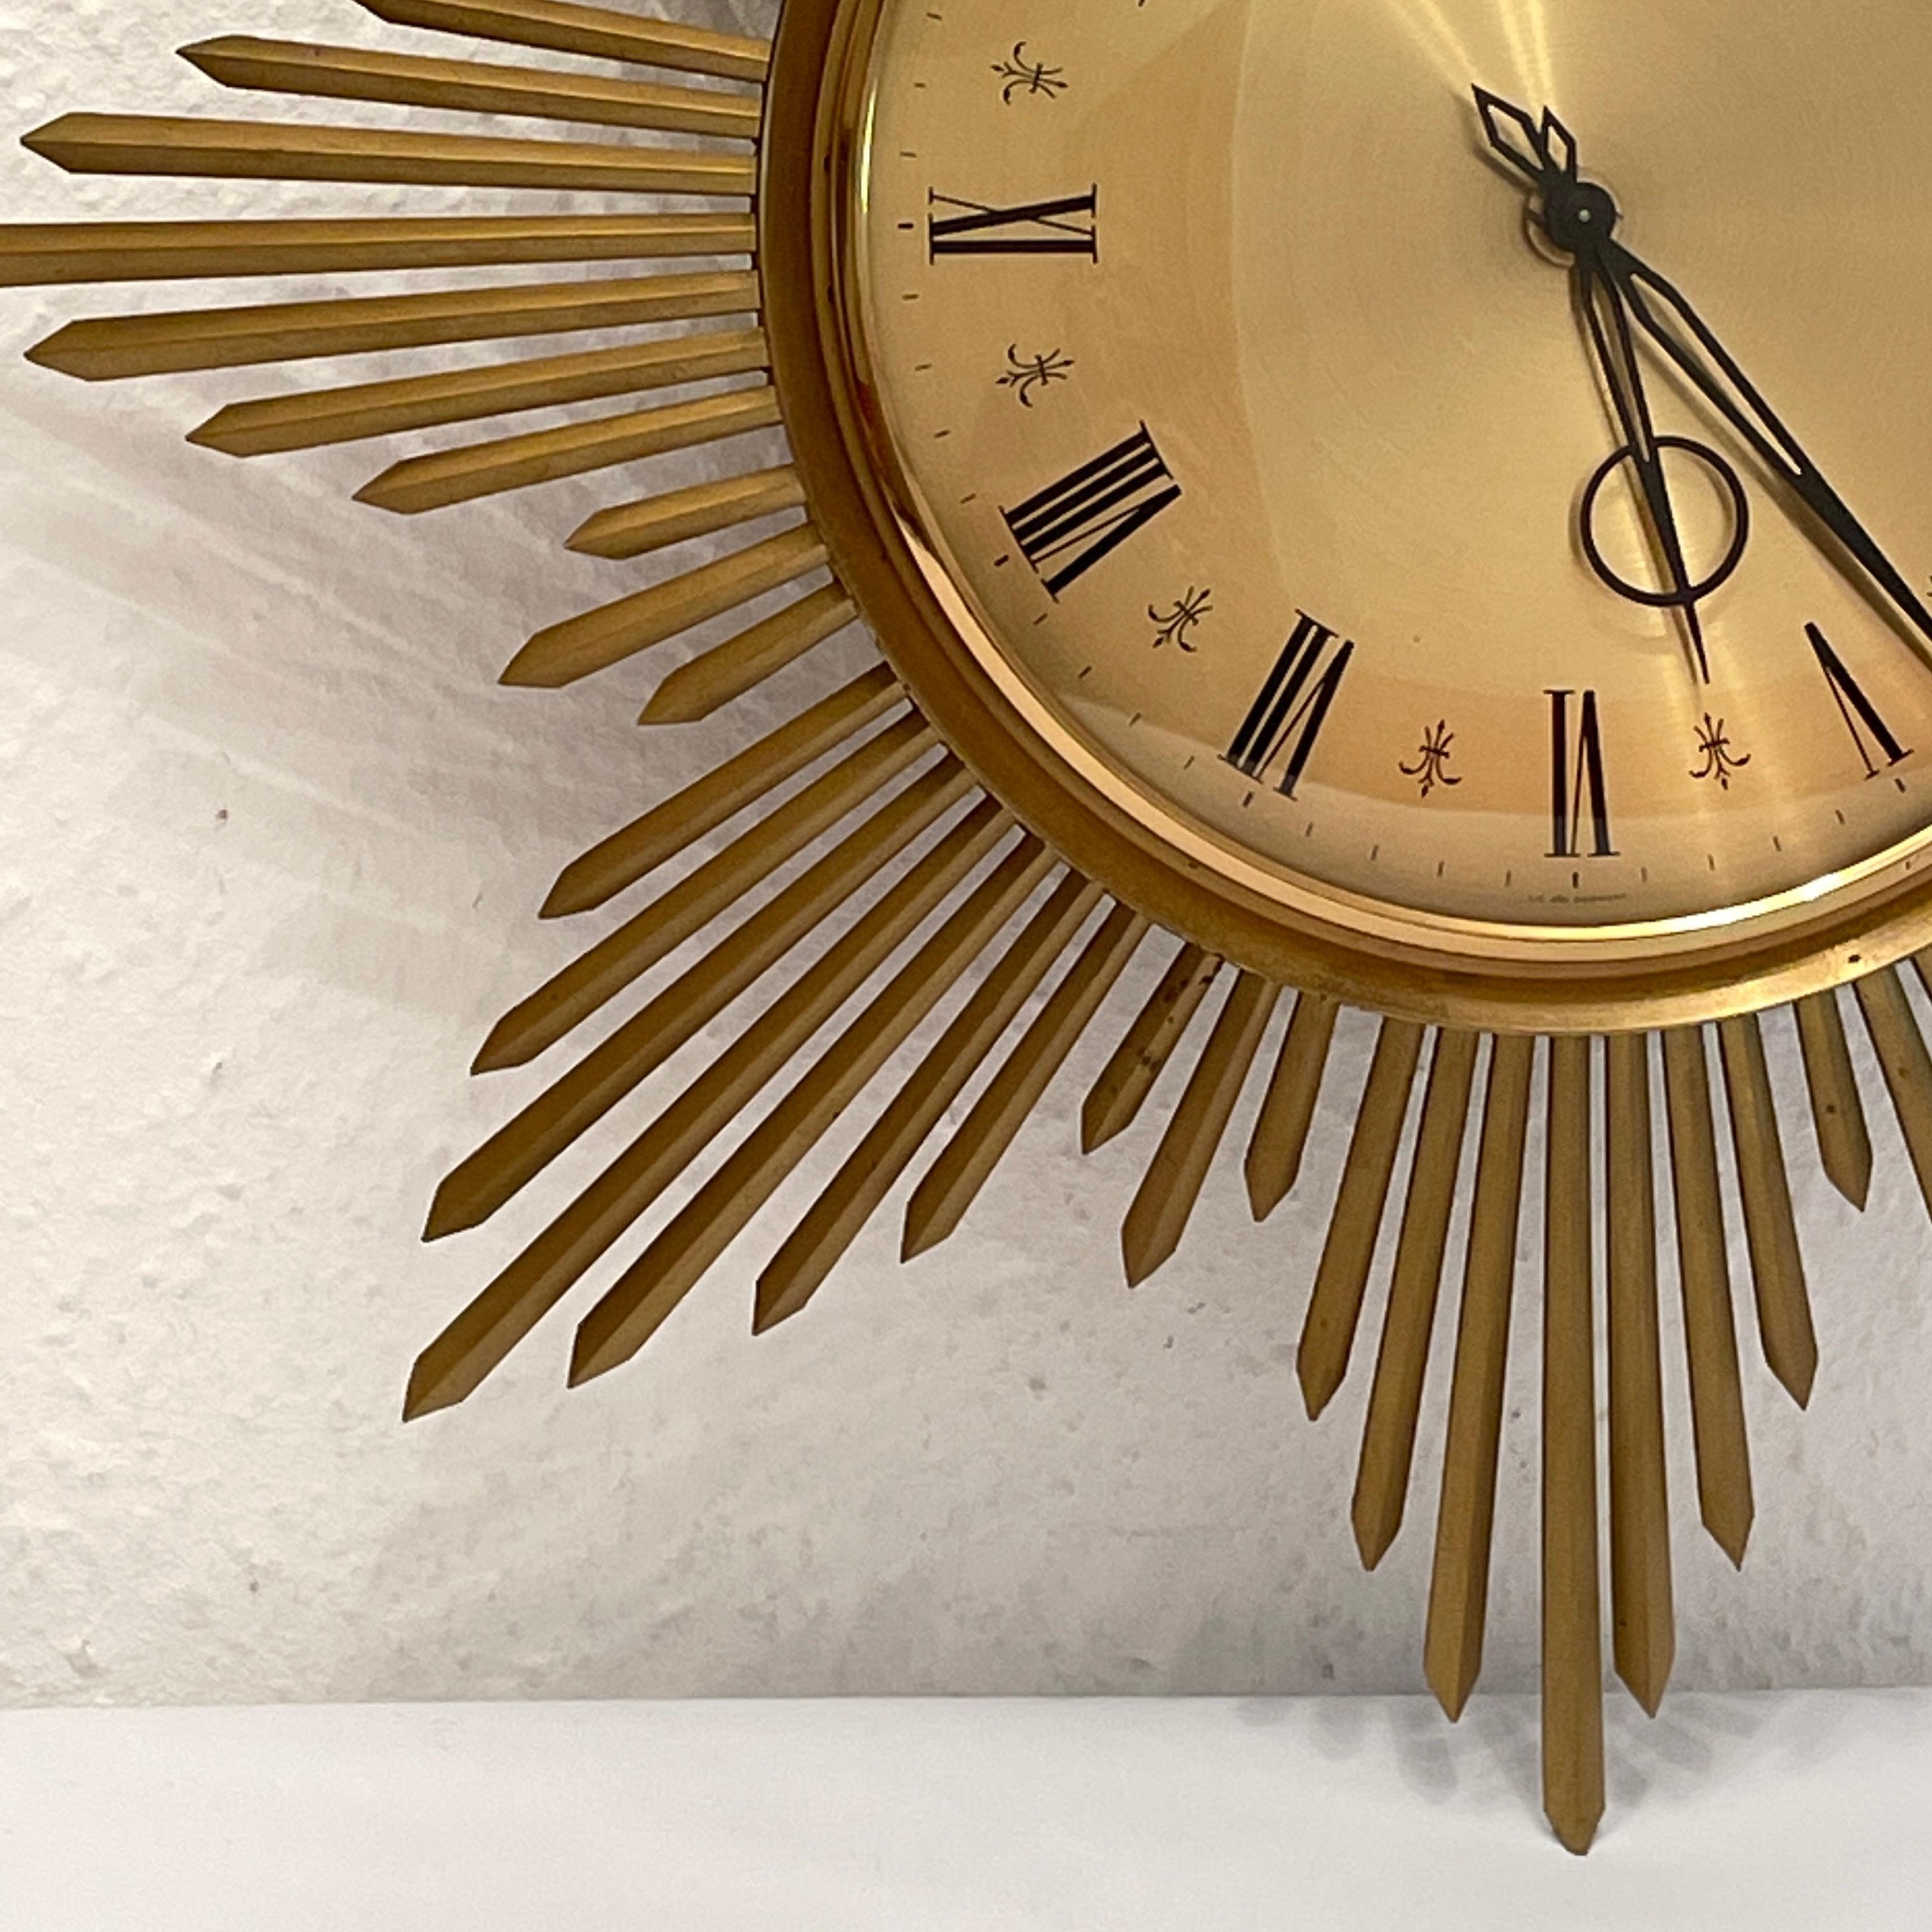 Stunning original 1960s Junghans ATO-MAT S sunburst starburst wall clock. Featuring beautiful brass sunburst surrounding illustrating perfectly the mood of the decade. The clock has the particularity of having an hinged face so hands can be accessed